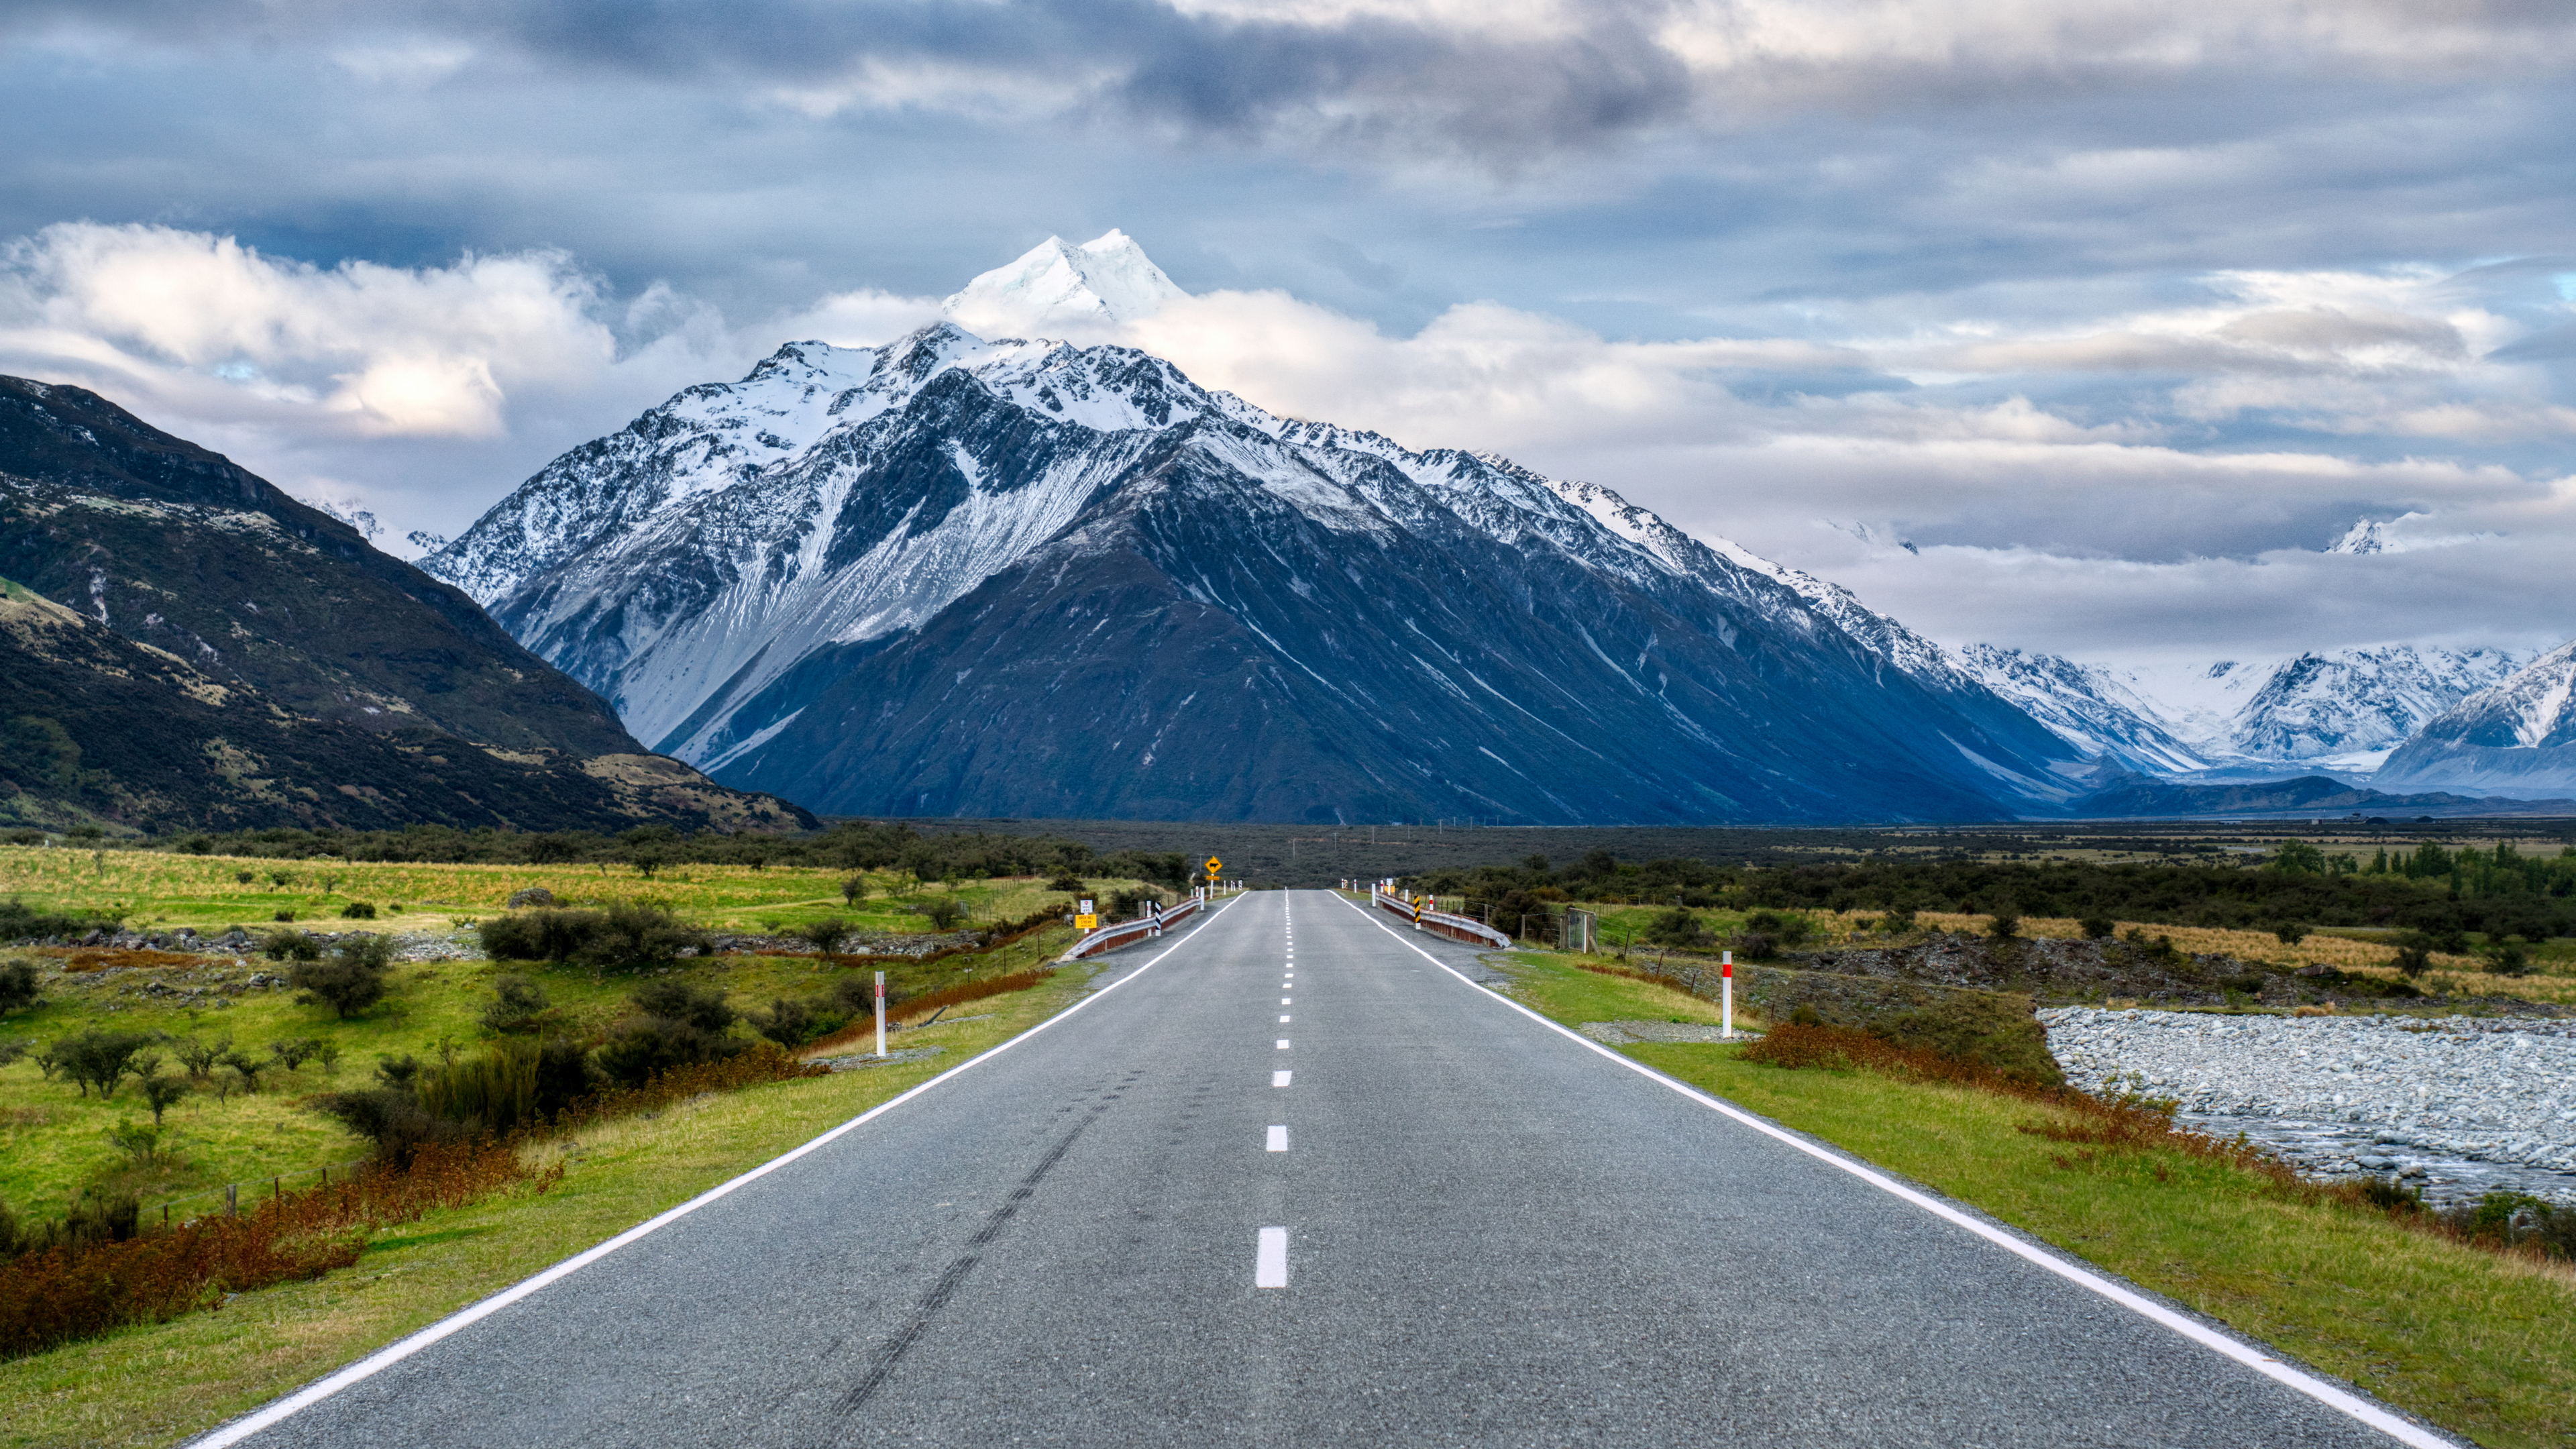 General 3840x2160 Trey Ratcliff photography road landscape mountains nature snow clouds New Zealand